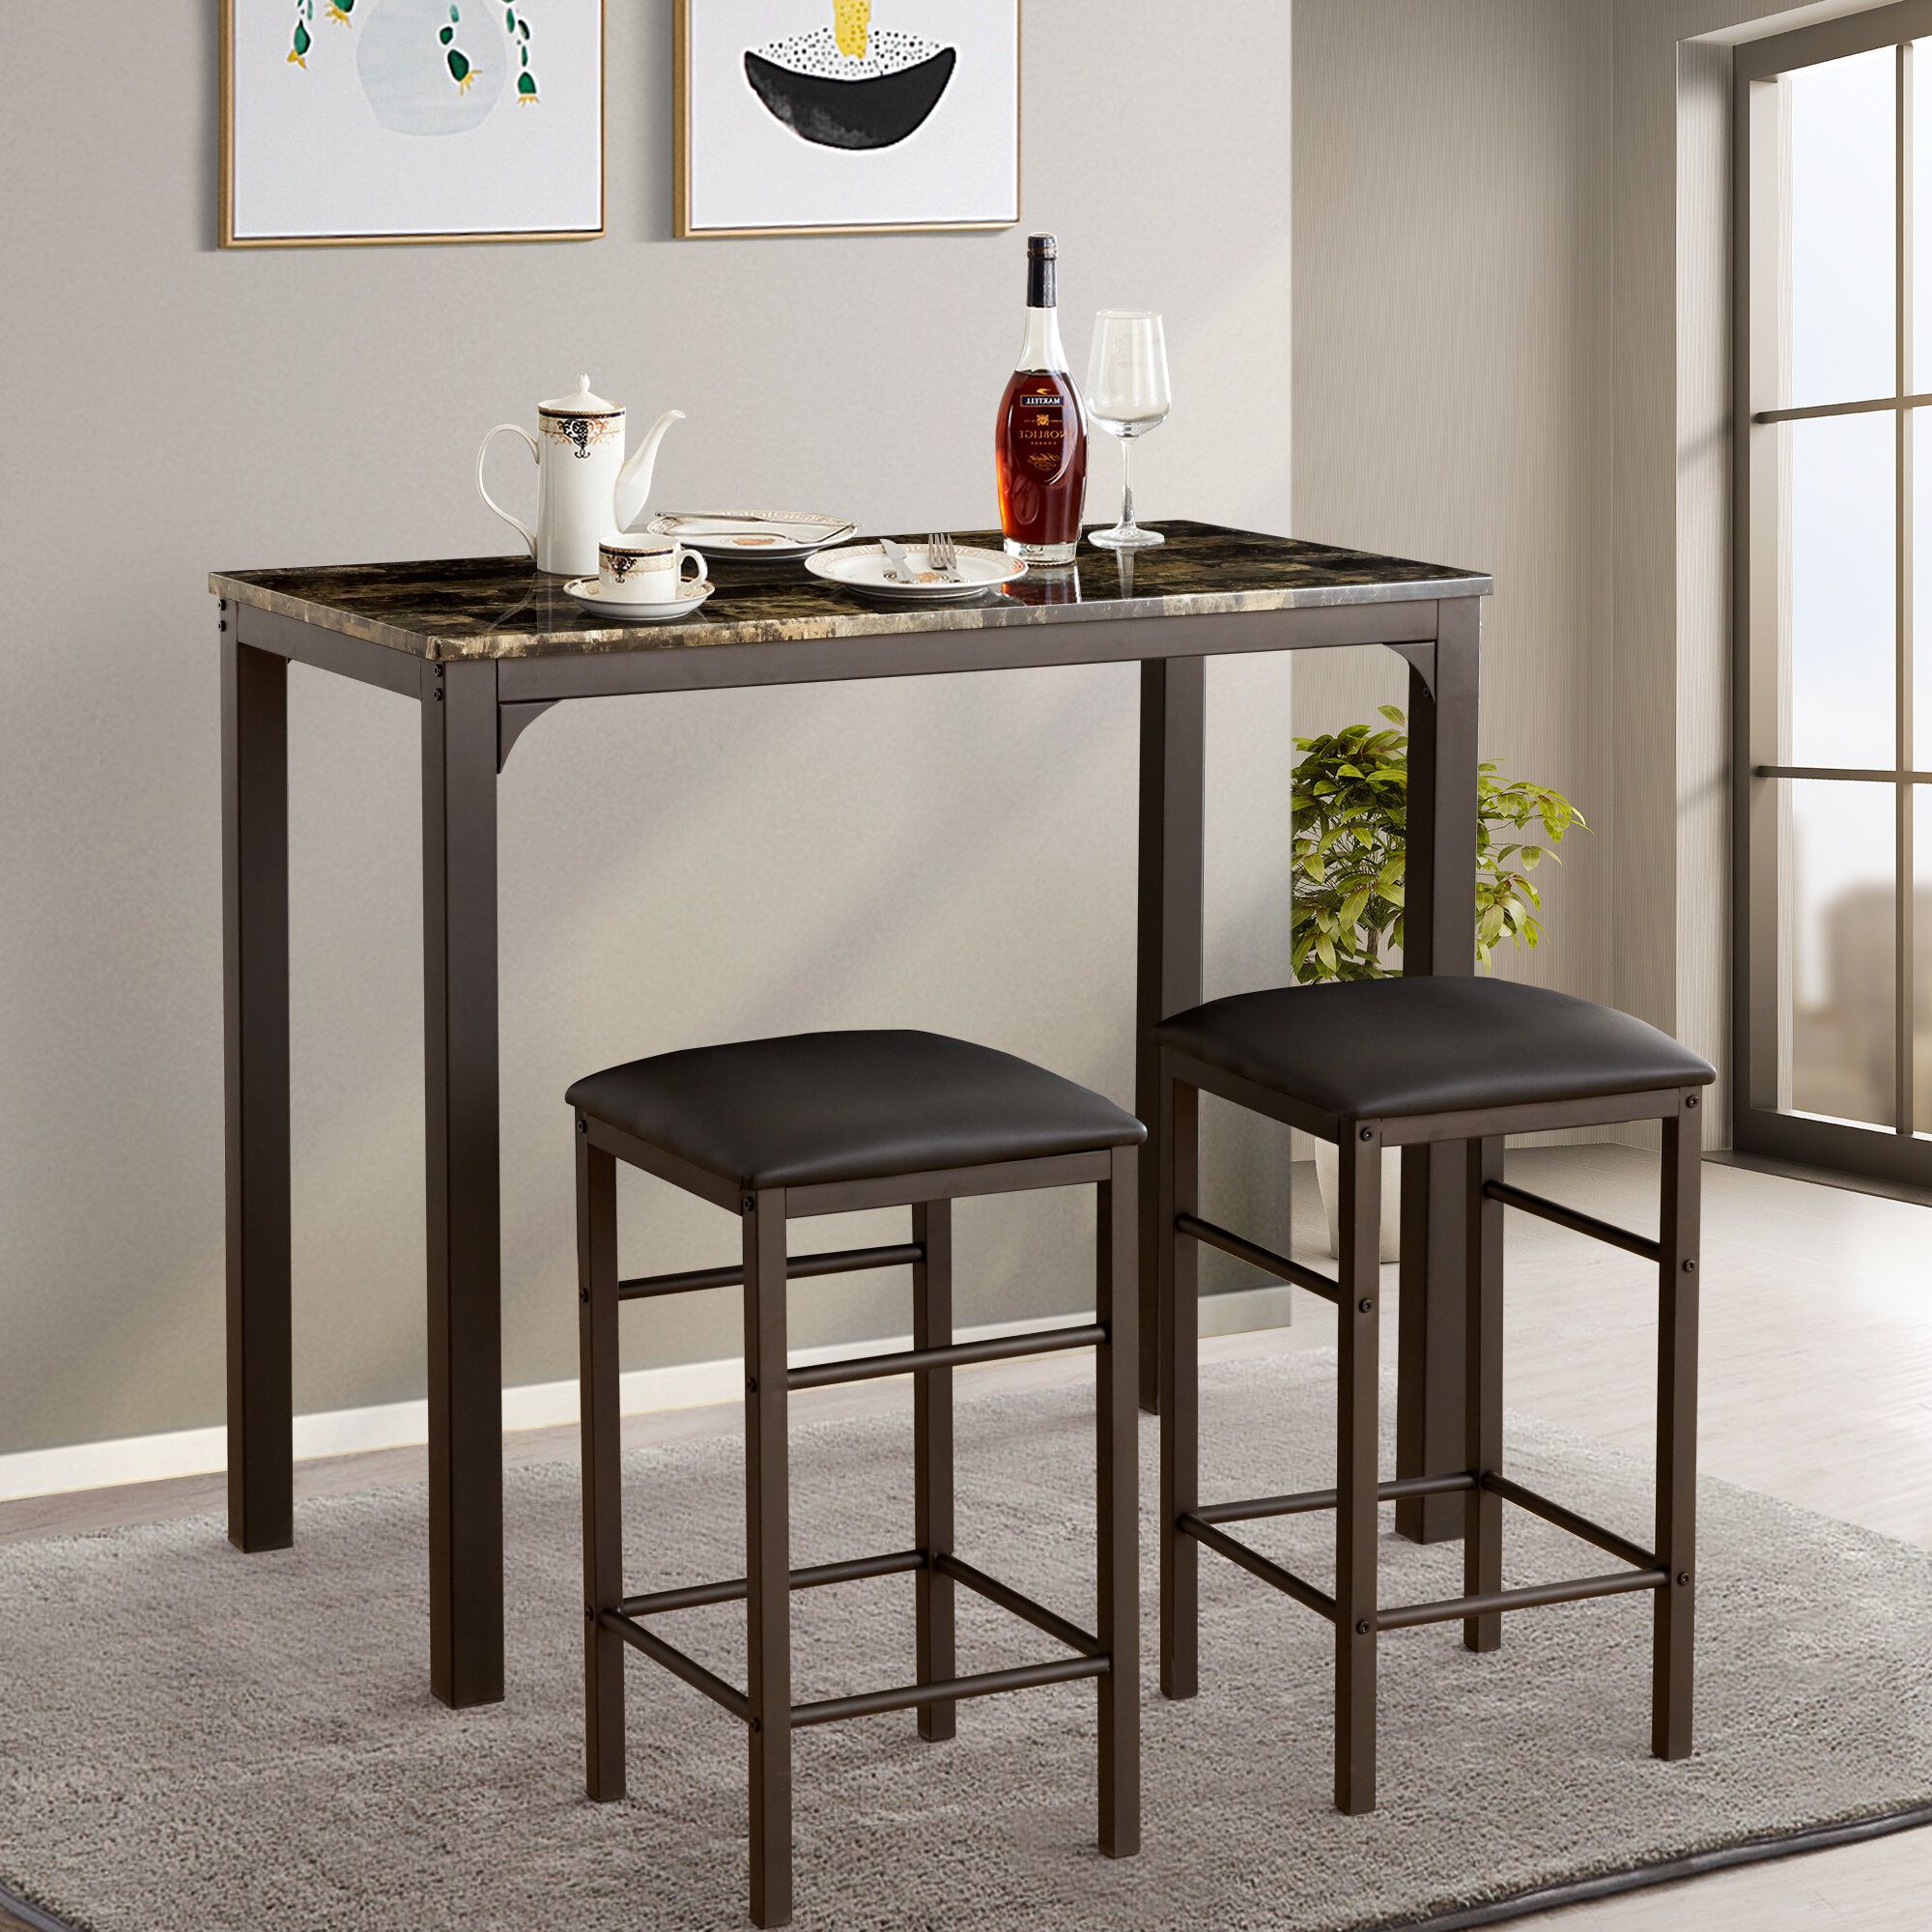 Tappahannock 3 Piece Counter Height Dining Set Pertaining To 2018 Nutter 3 Piece Dining Sets (View 4 of 20)